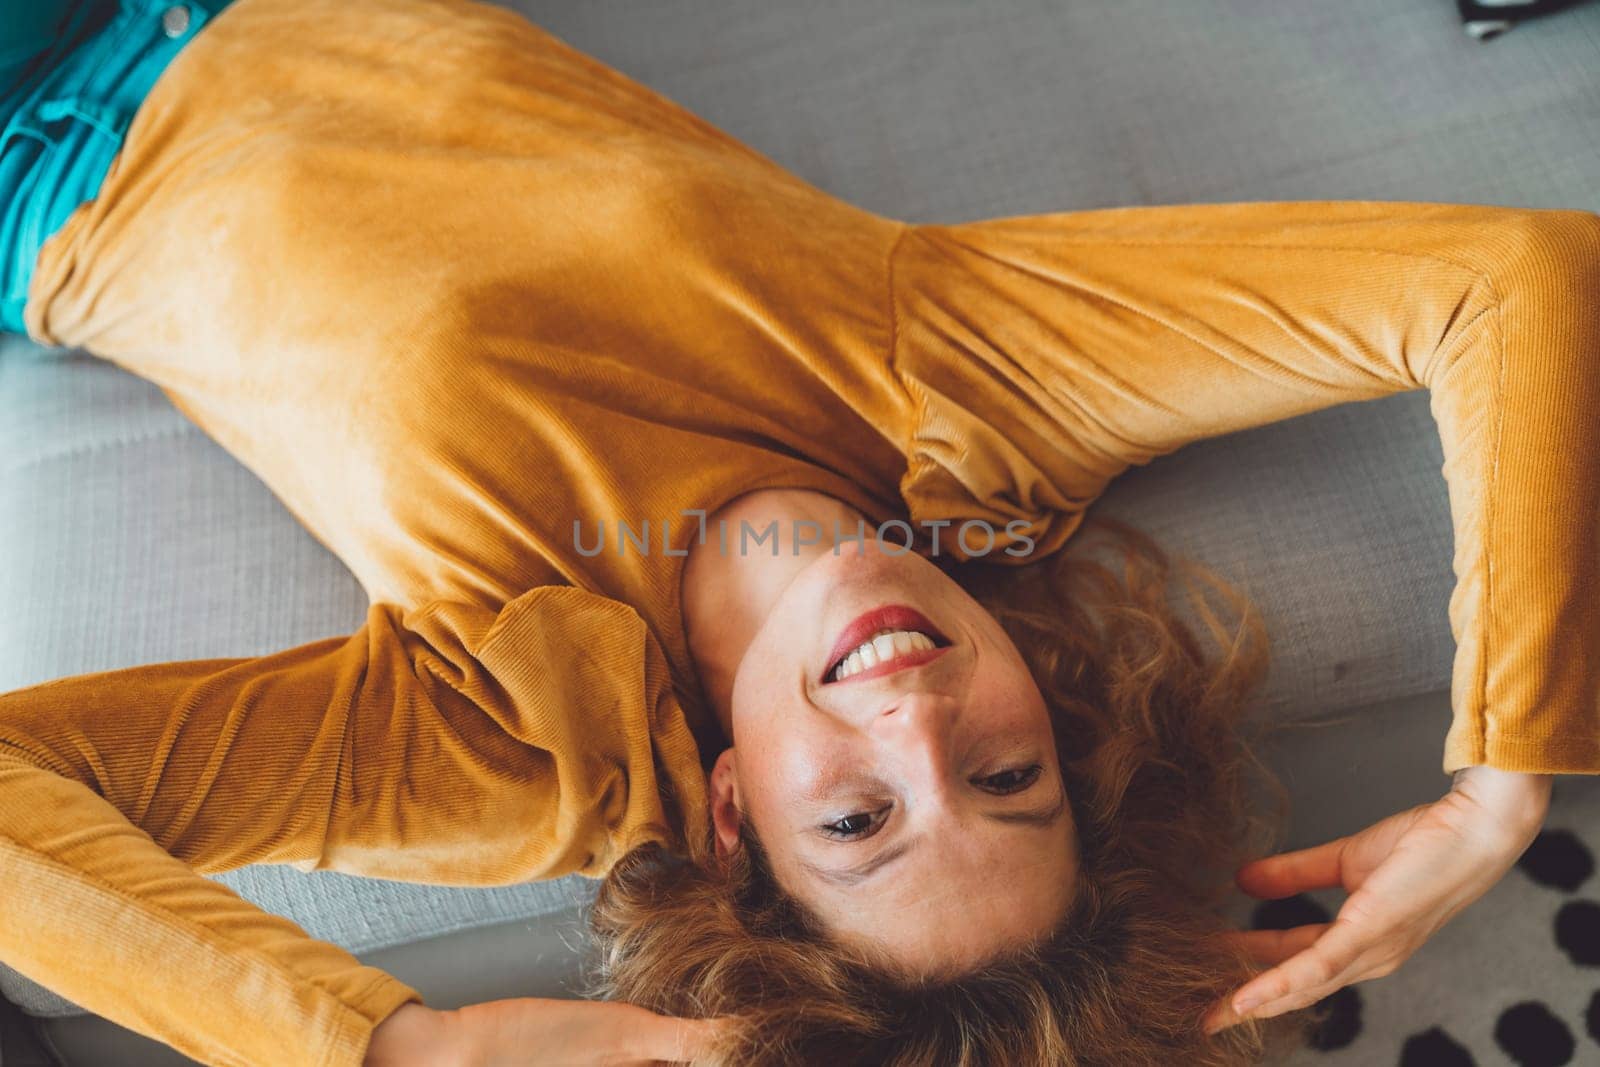 Smiling woman laying on the couch in a velvet yellow shirt playing with her hair looking at the camera by VisualProductions